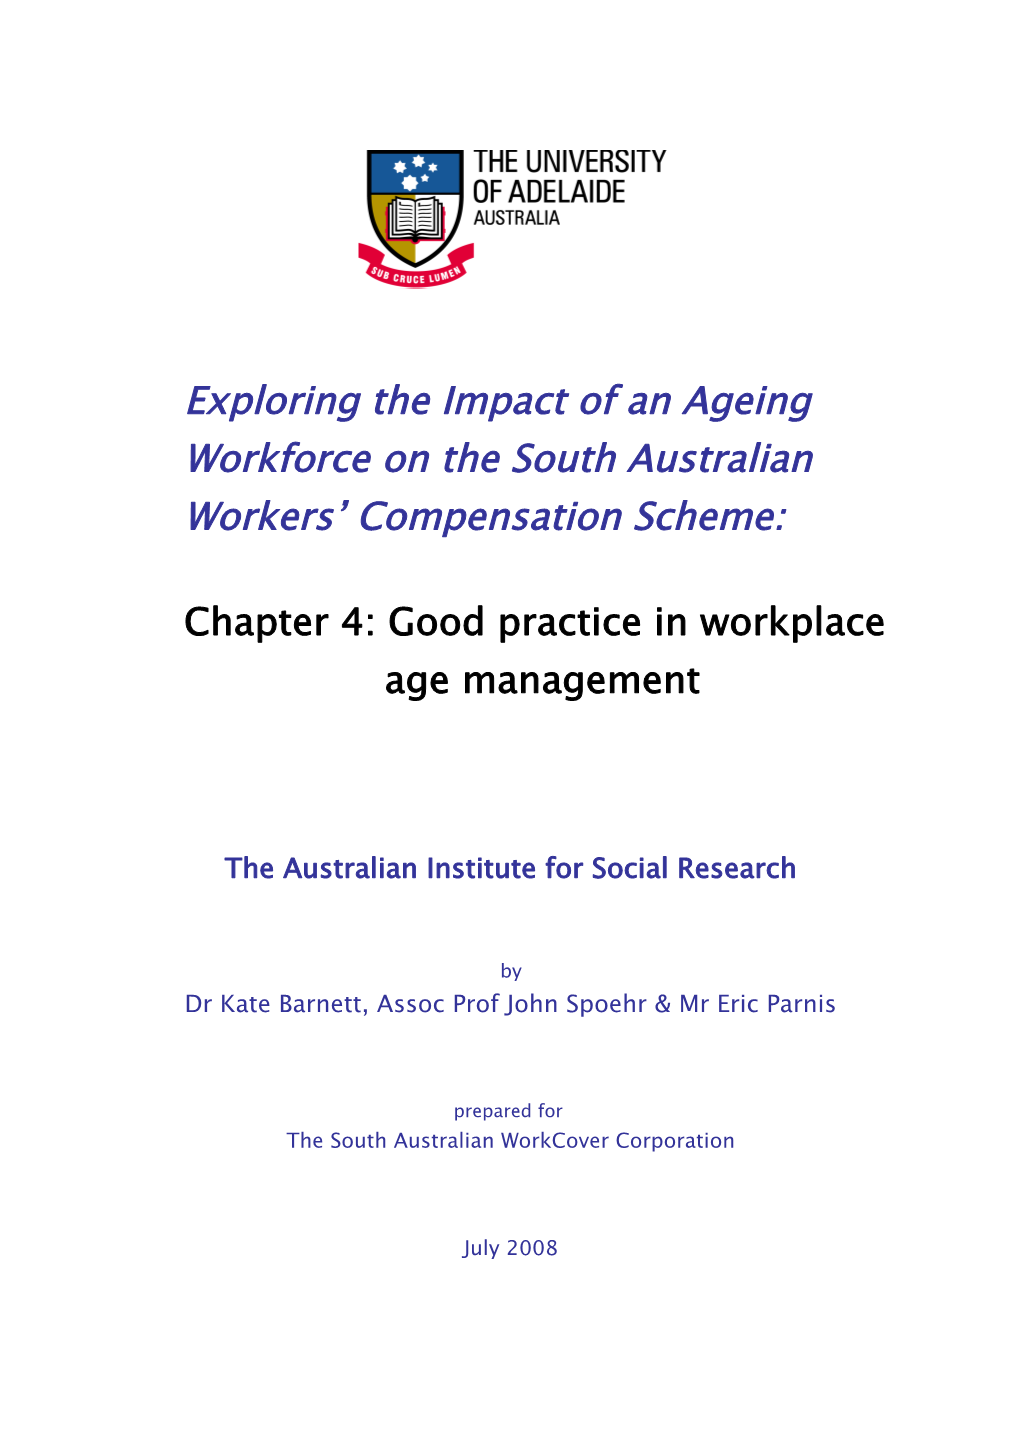 Exploring the Impact of an Ageing Workforce on the South Australian Workers Compensation